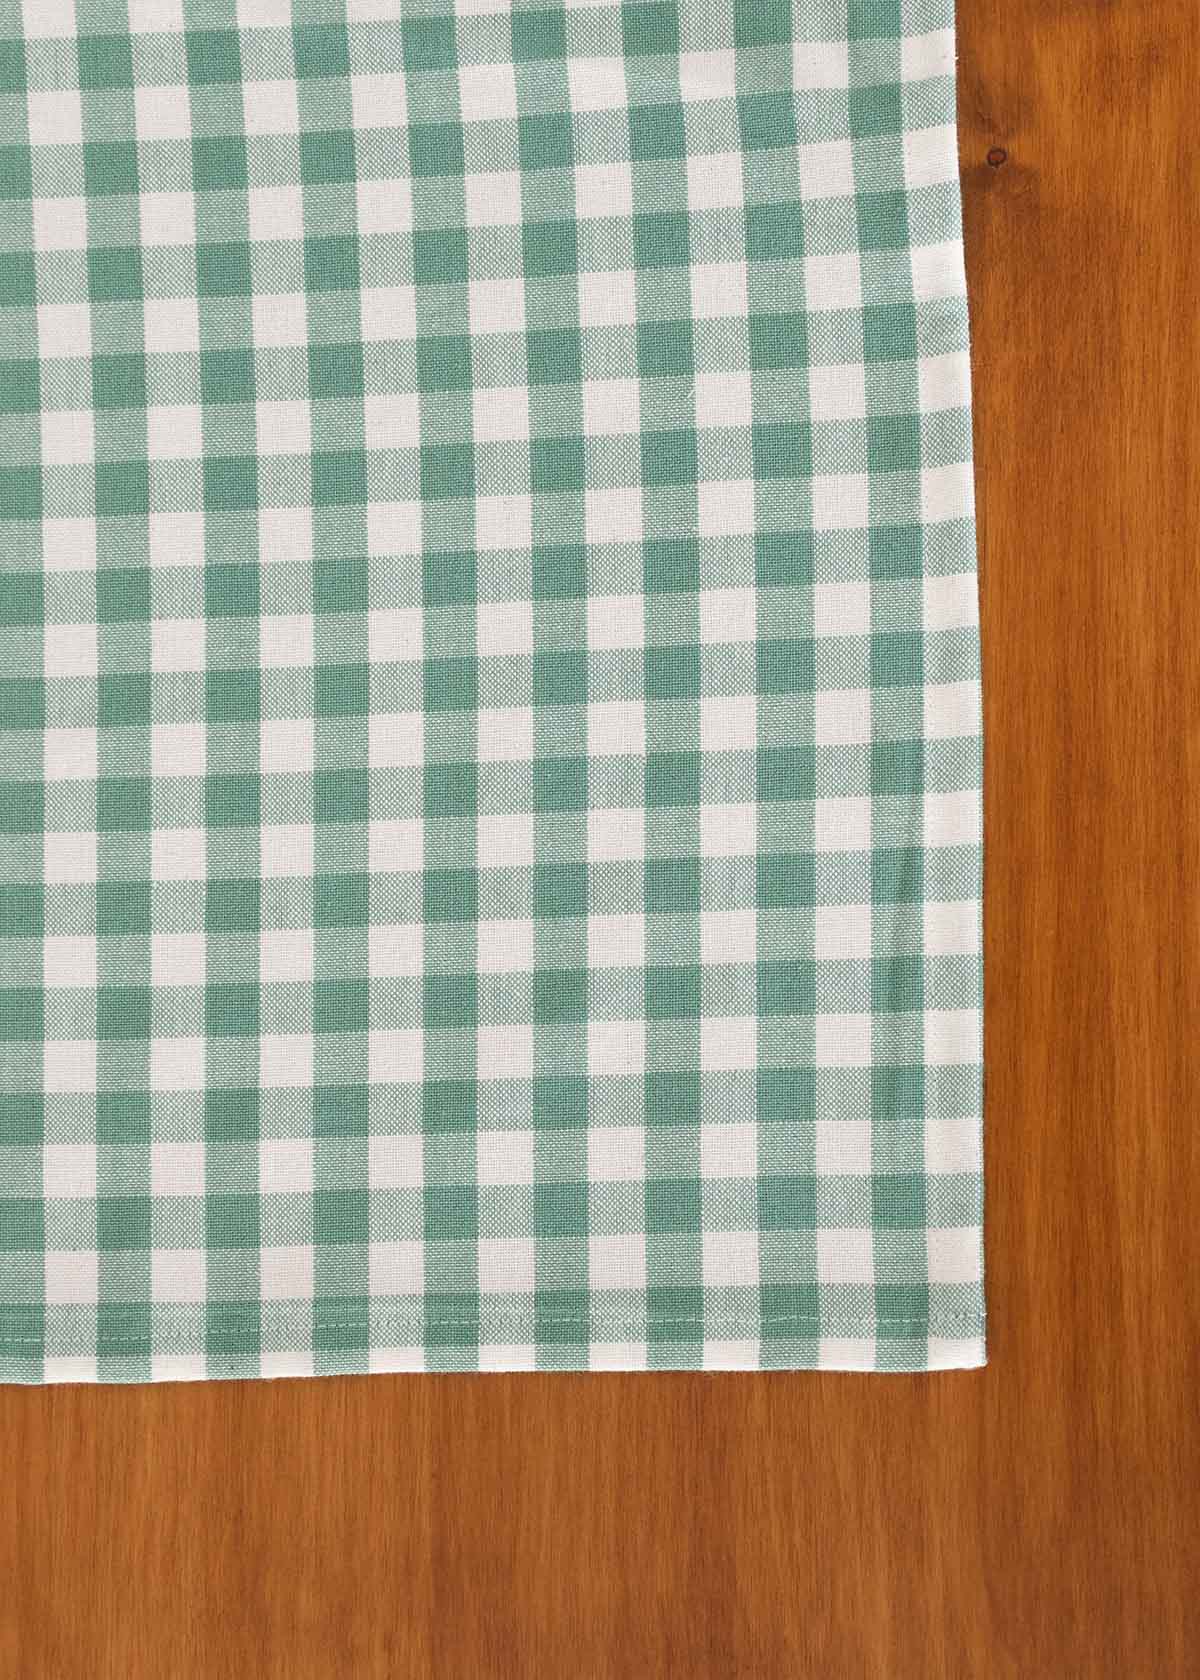 Gingham checks 100% cotton geometric table cloth for 4 seater or 6 seater dining - Sage Green